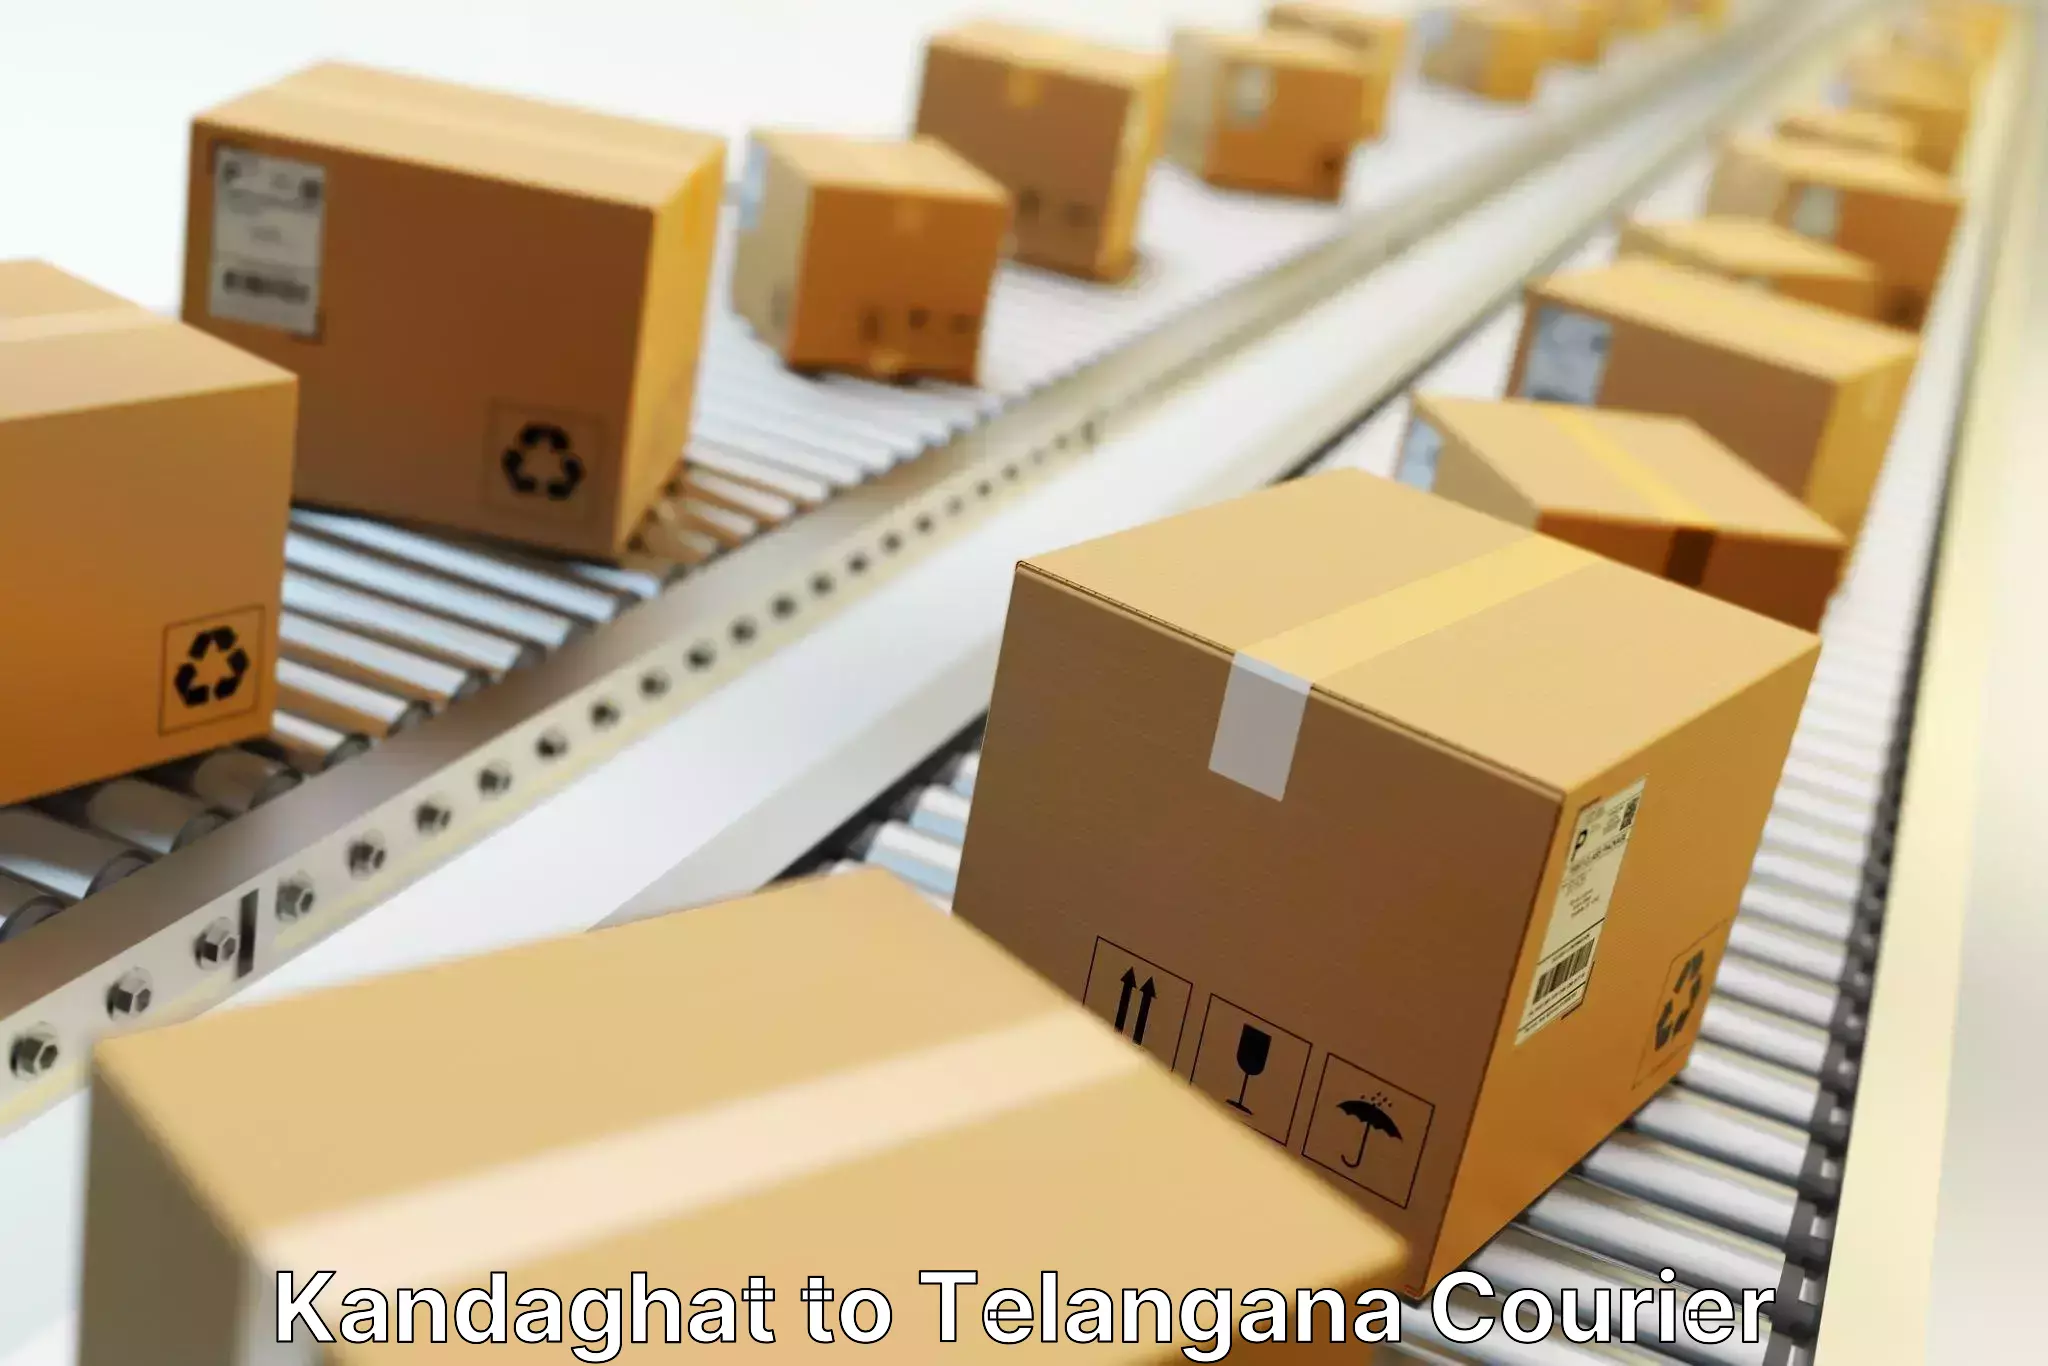 Holiday shipping services Kandaghat to Secunderabad